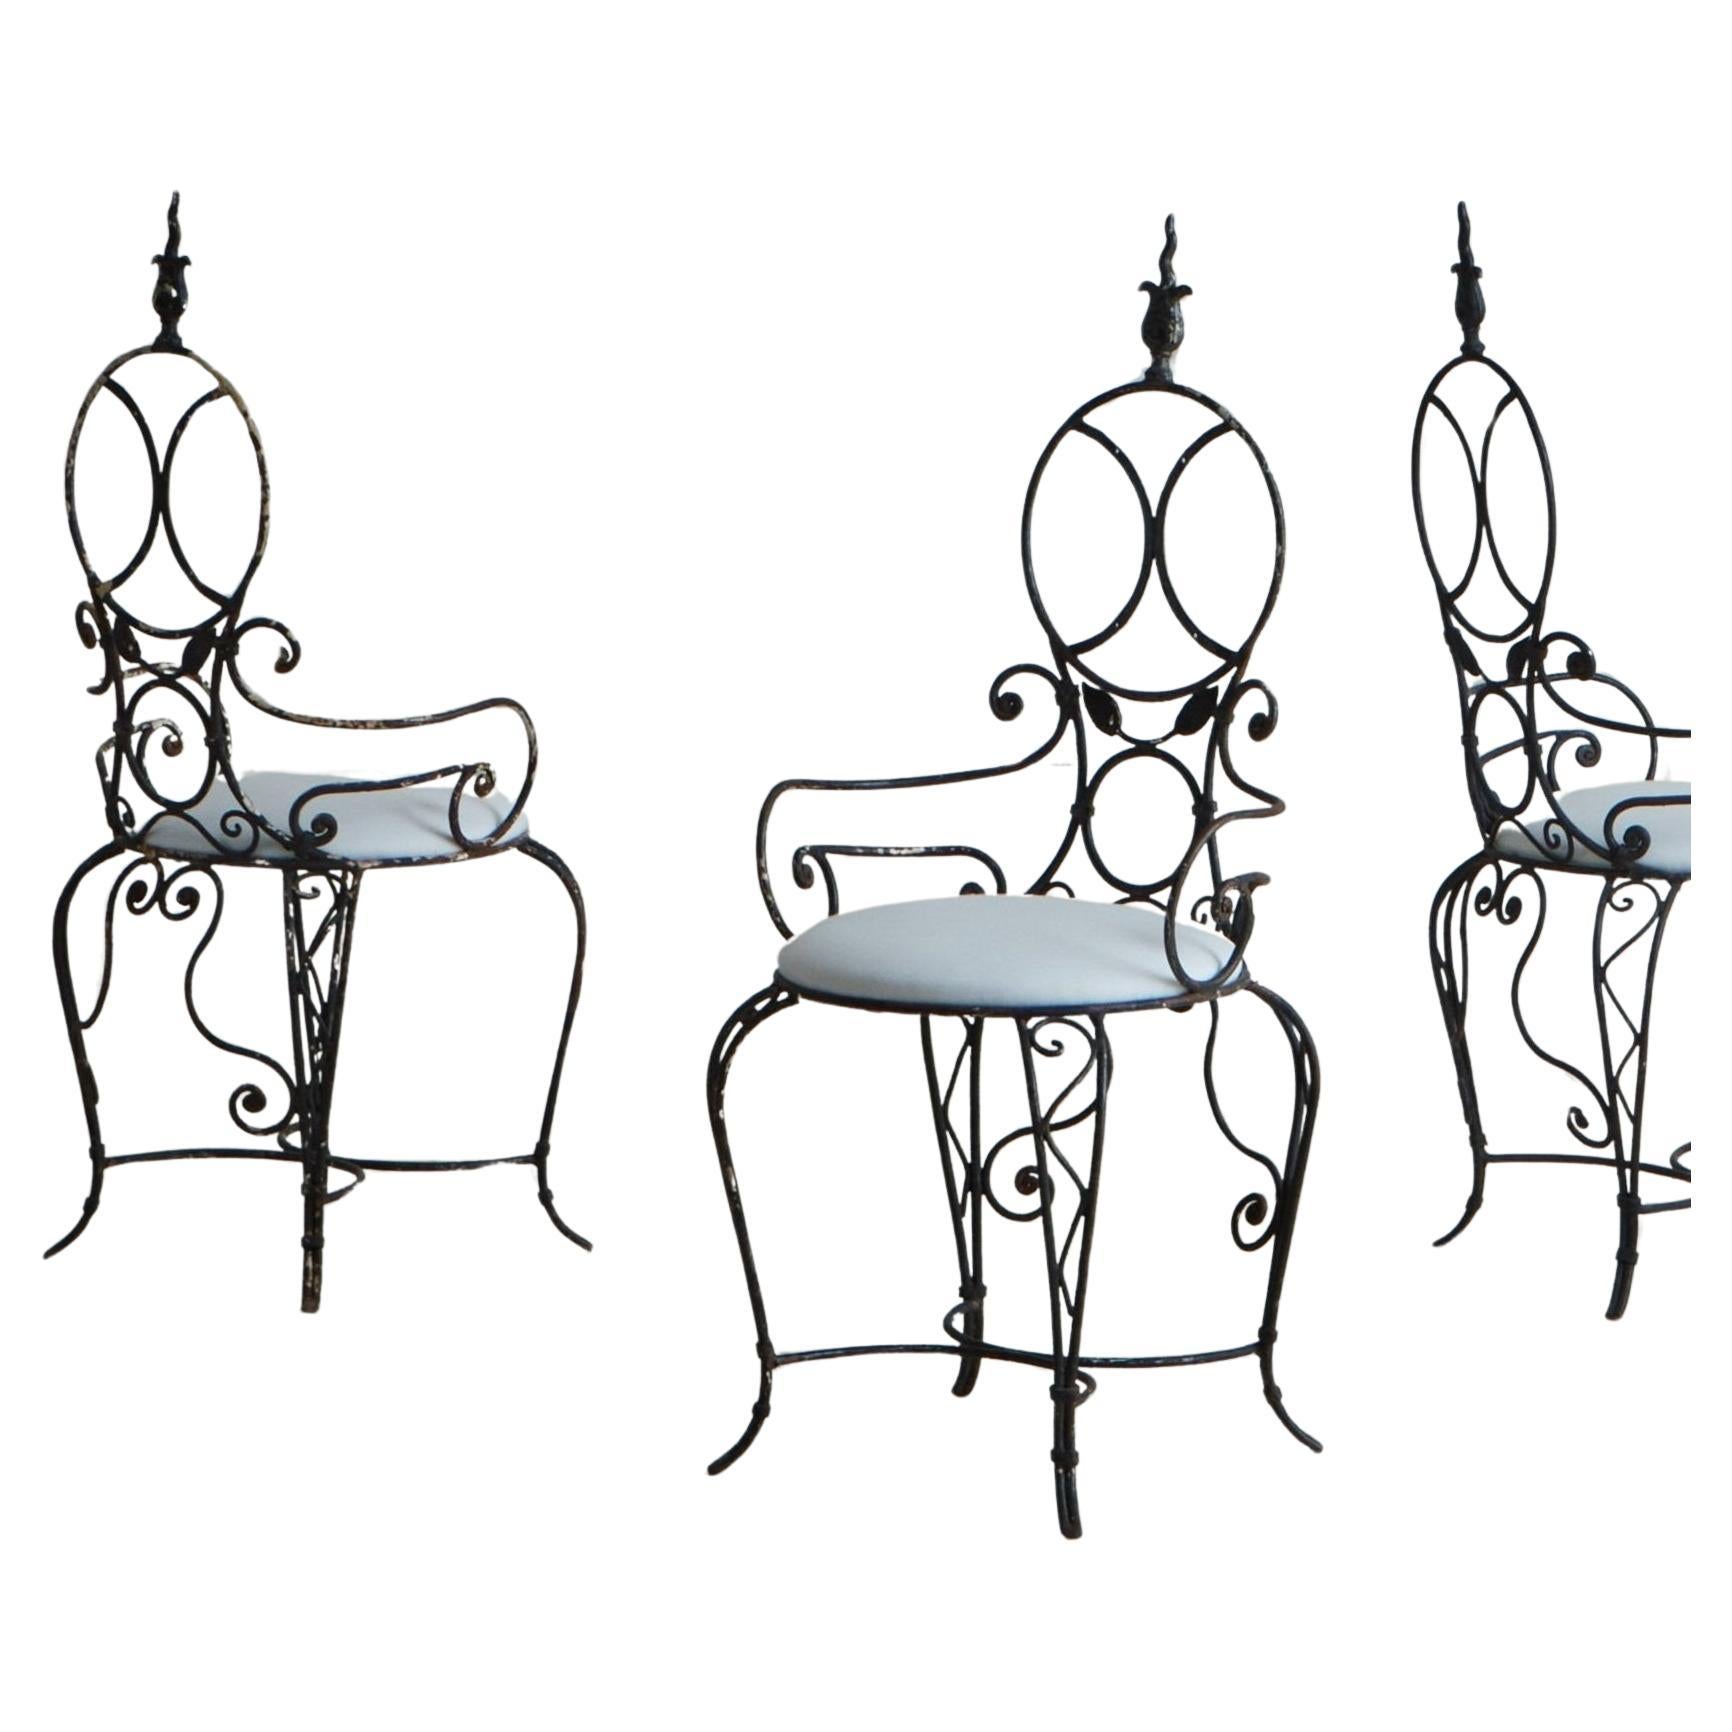 A set of 6 vintage French dining chairs featuring intricate wrought iron frames with elegant scrolls, leaf motifs and an X-support bar. These chairs have circular seatbacks with decorative finials and stand on curved, cabriole legs. The circular